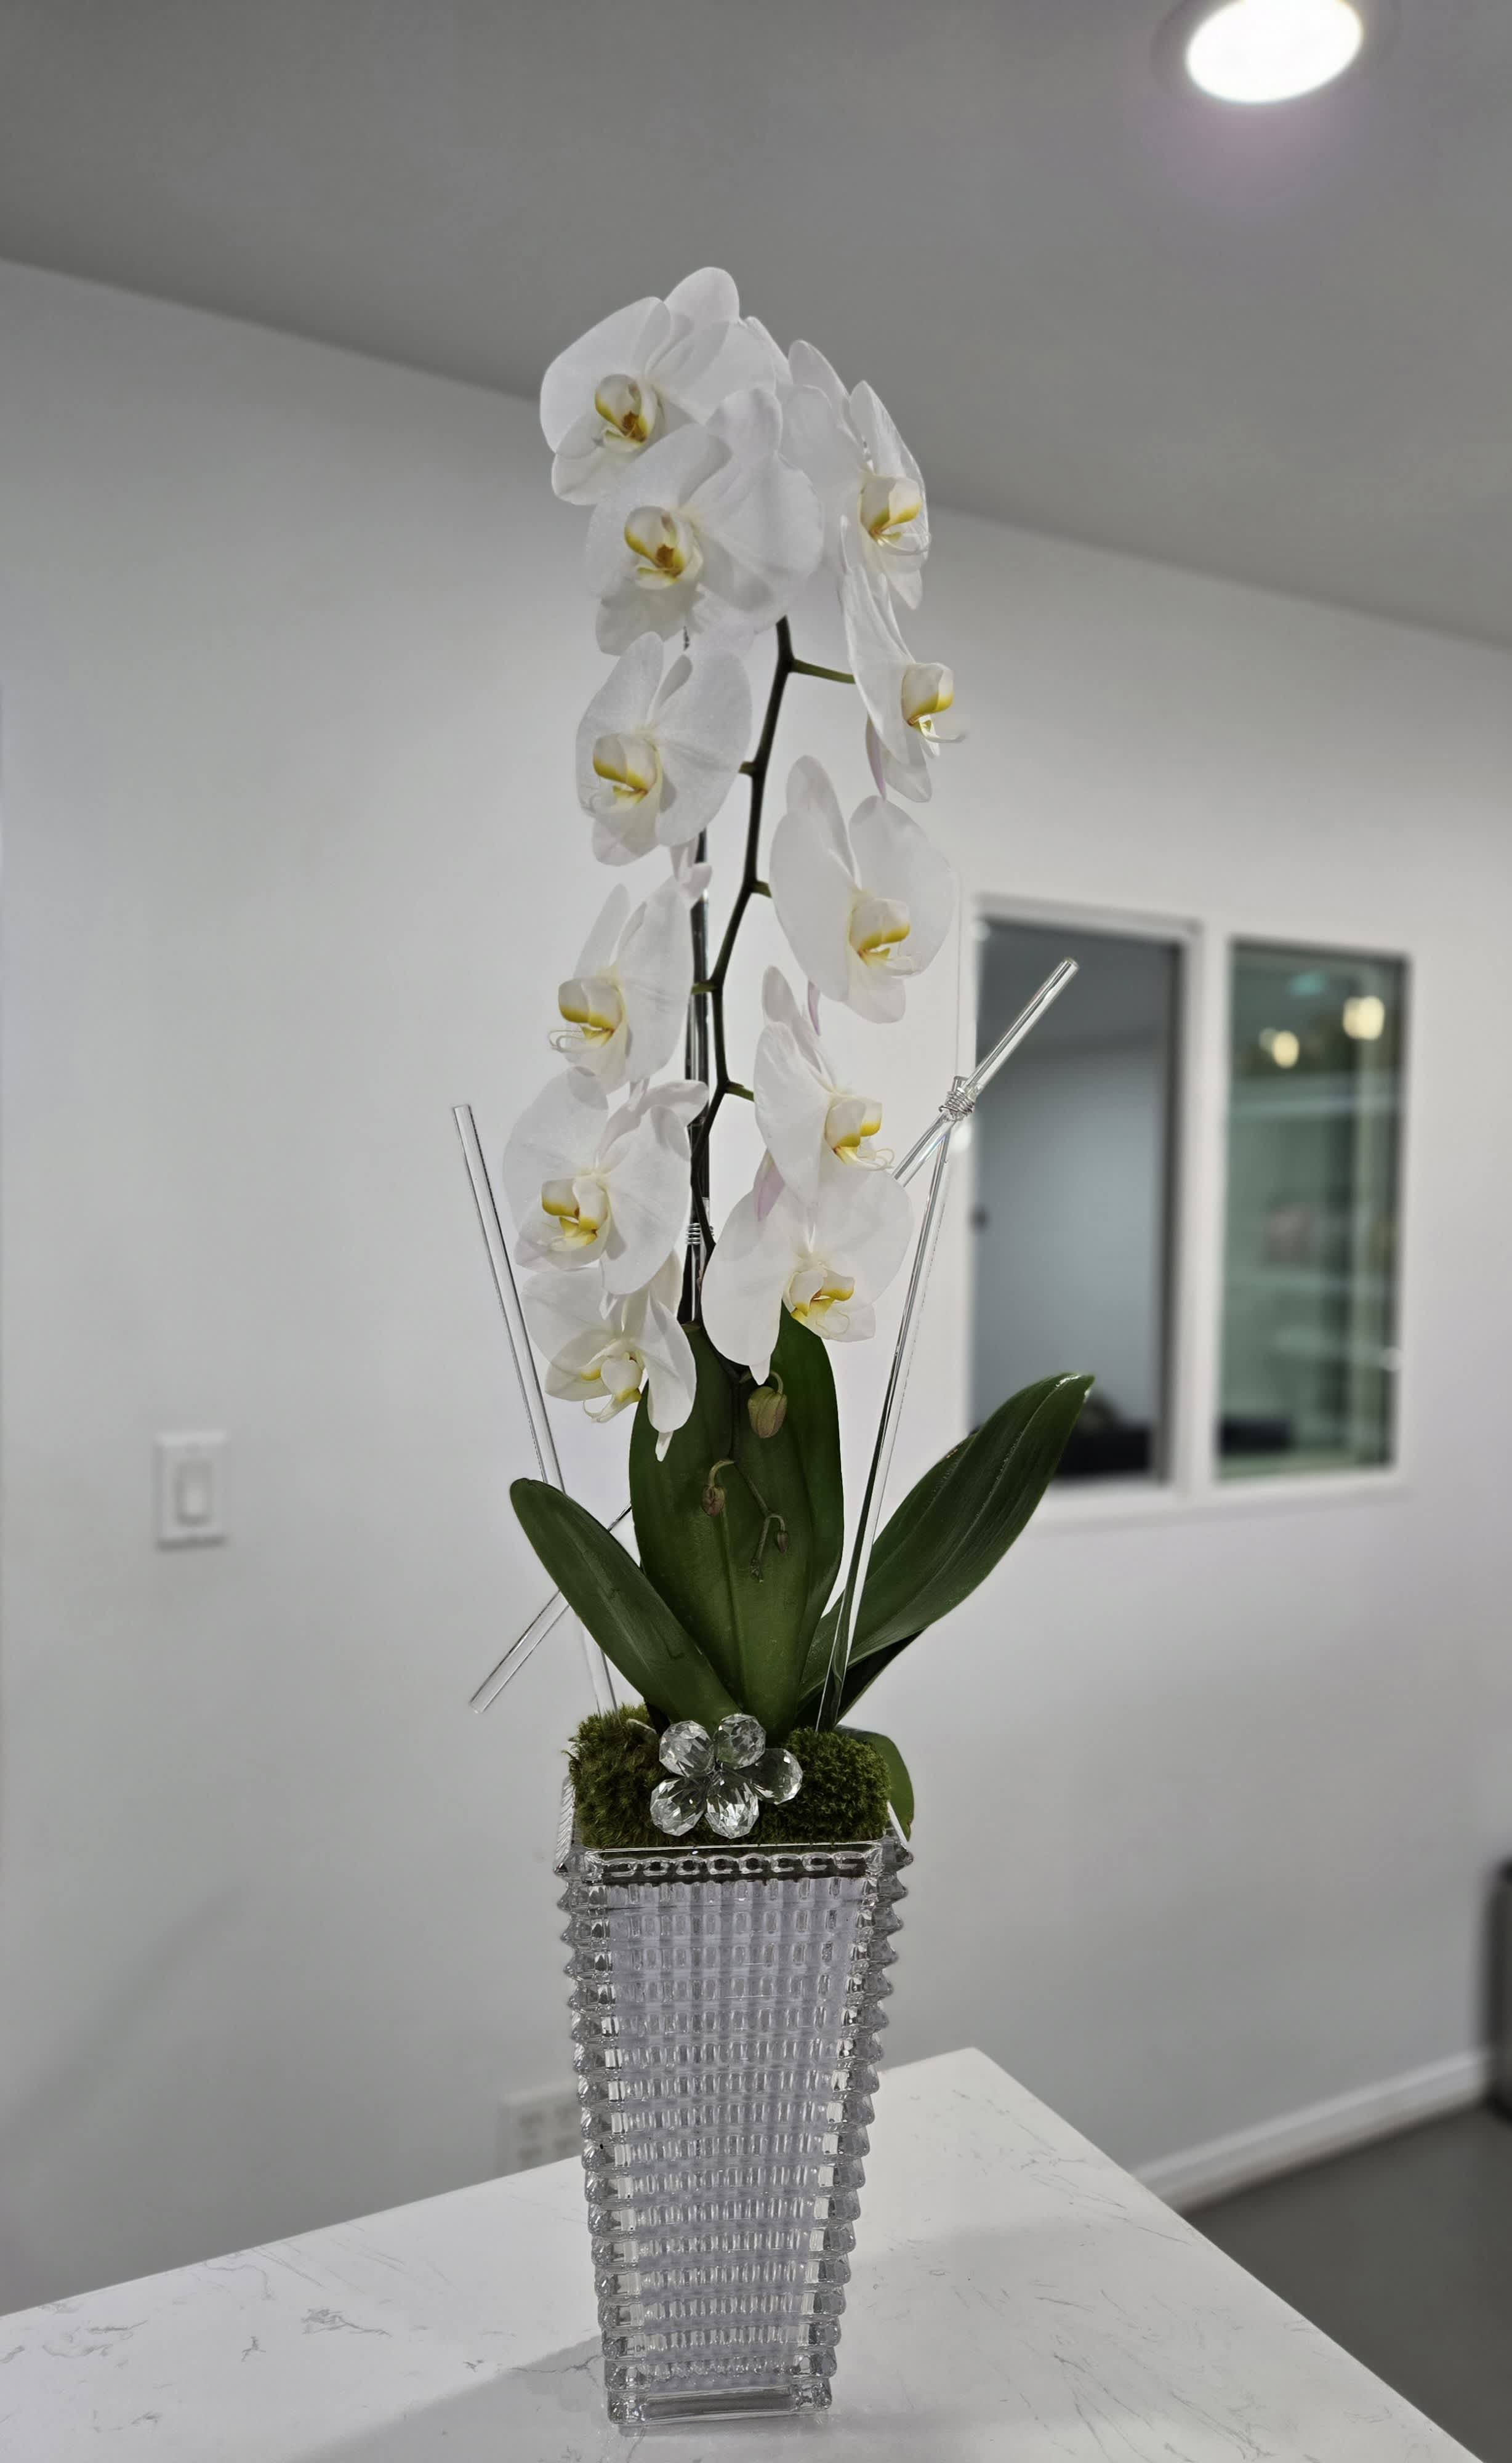 Crystal Orchid - White cascading orchid plant in crystal vase. An elegant touch for a home or office.